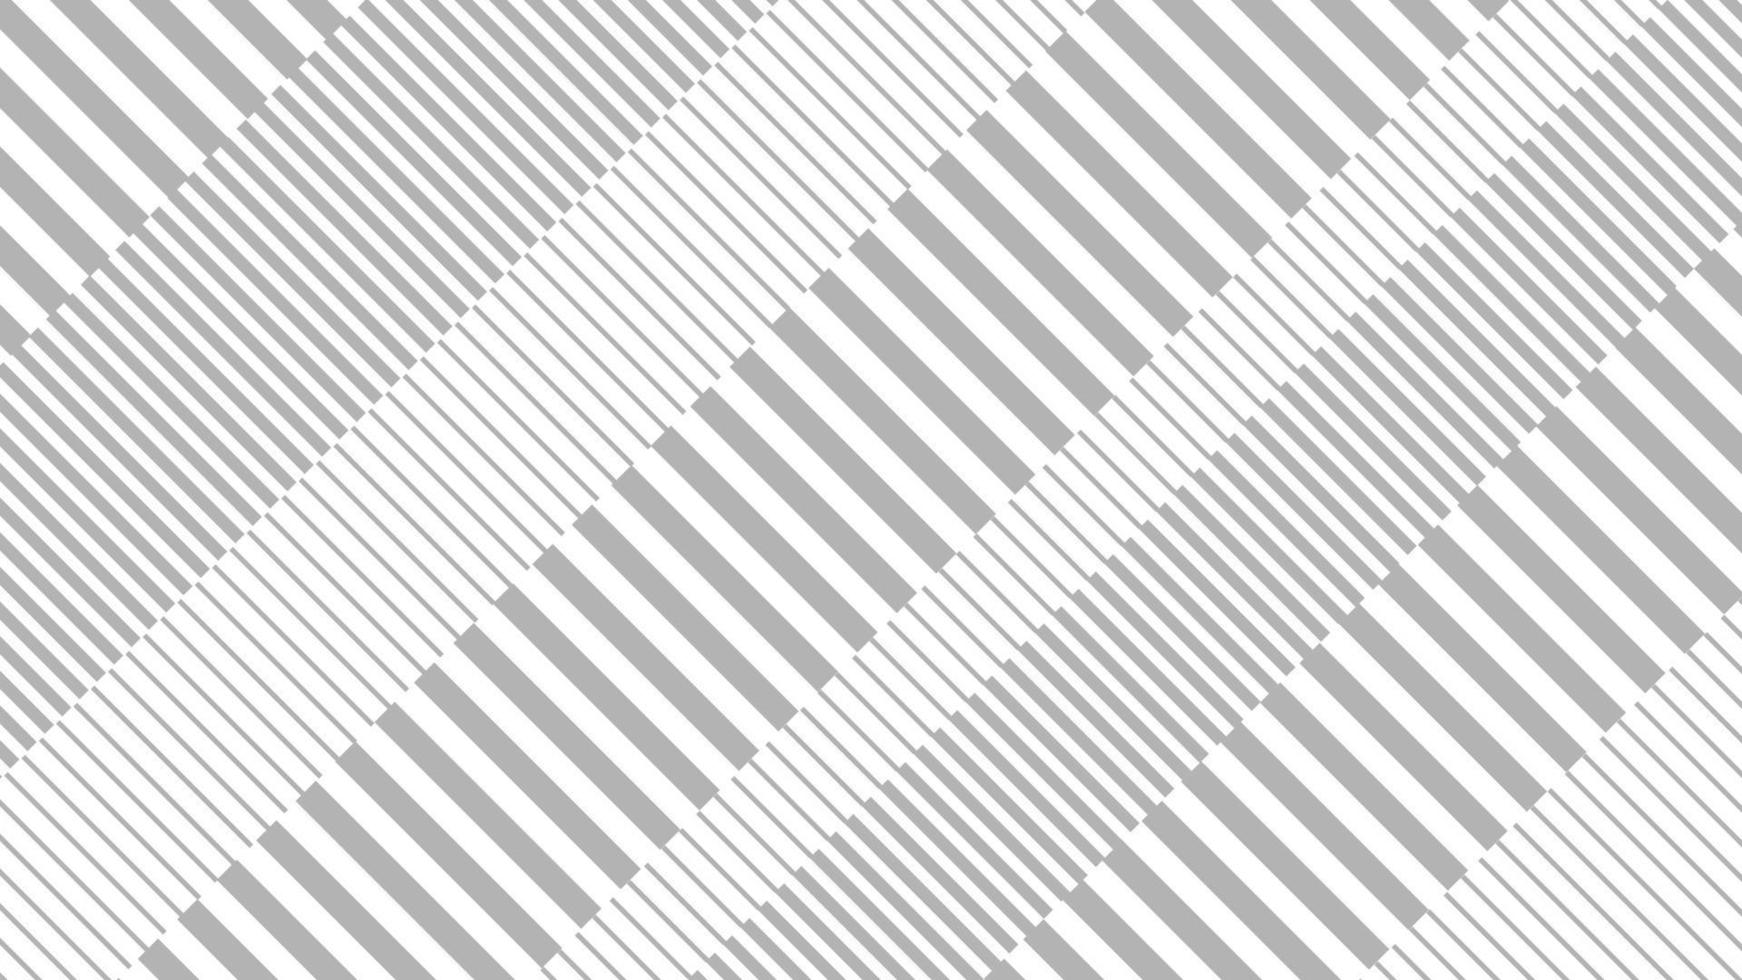 Abstract diagonal lines white backround vector